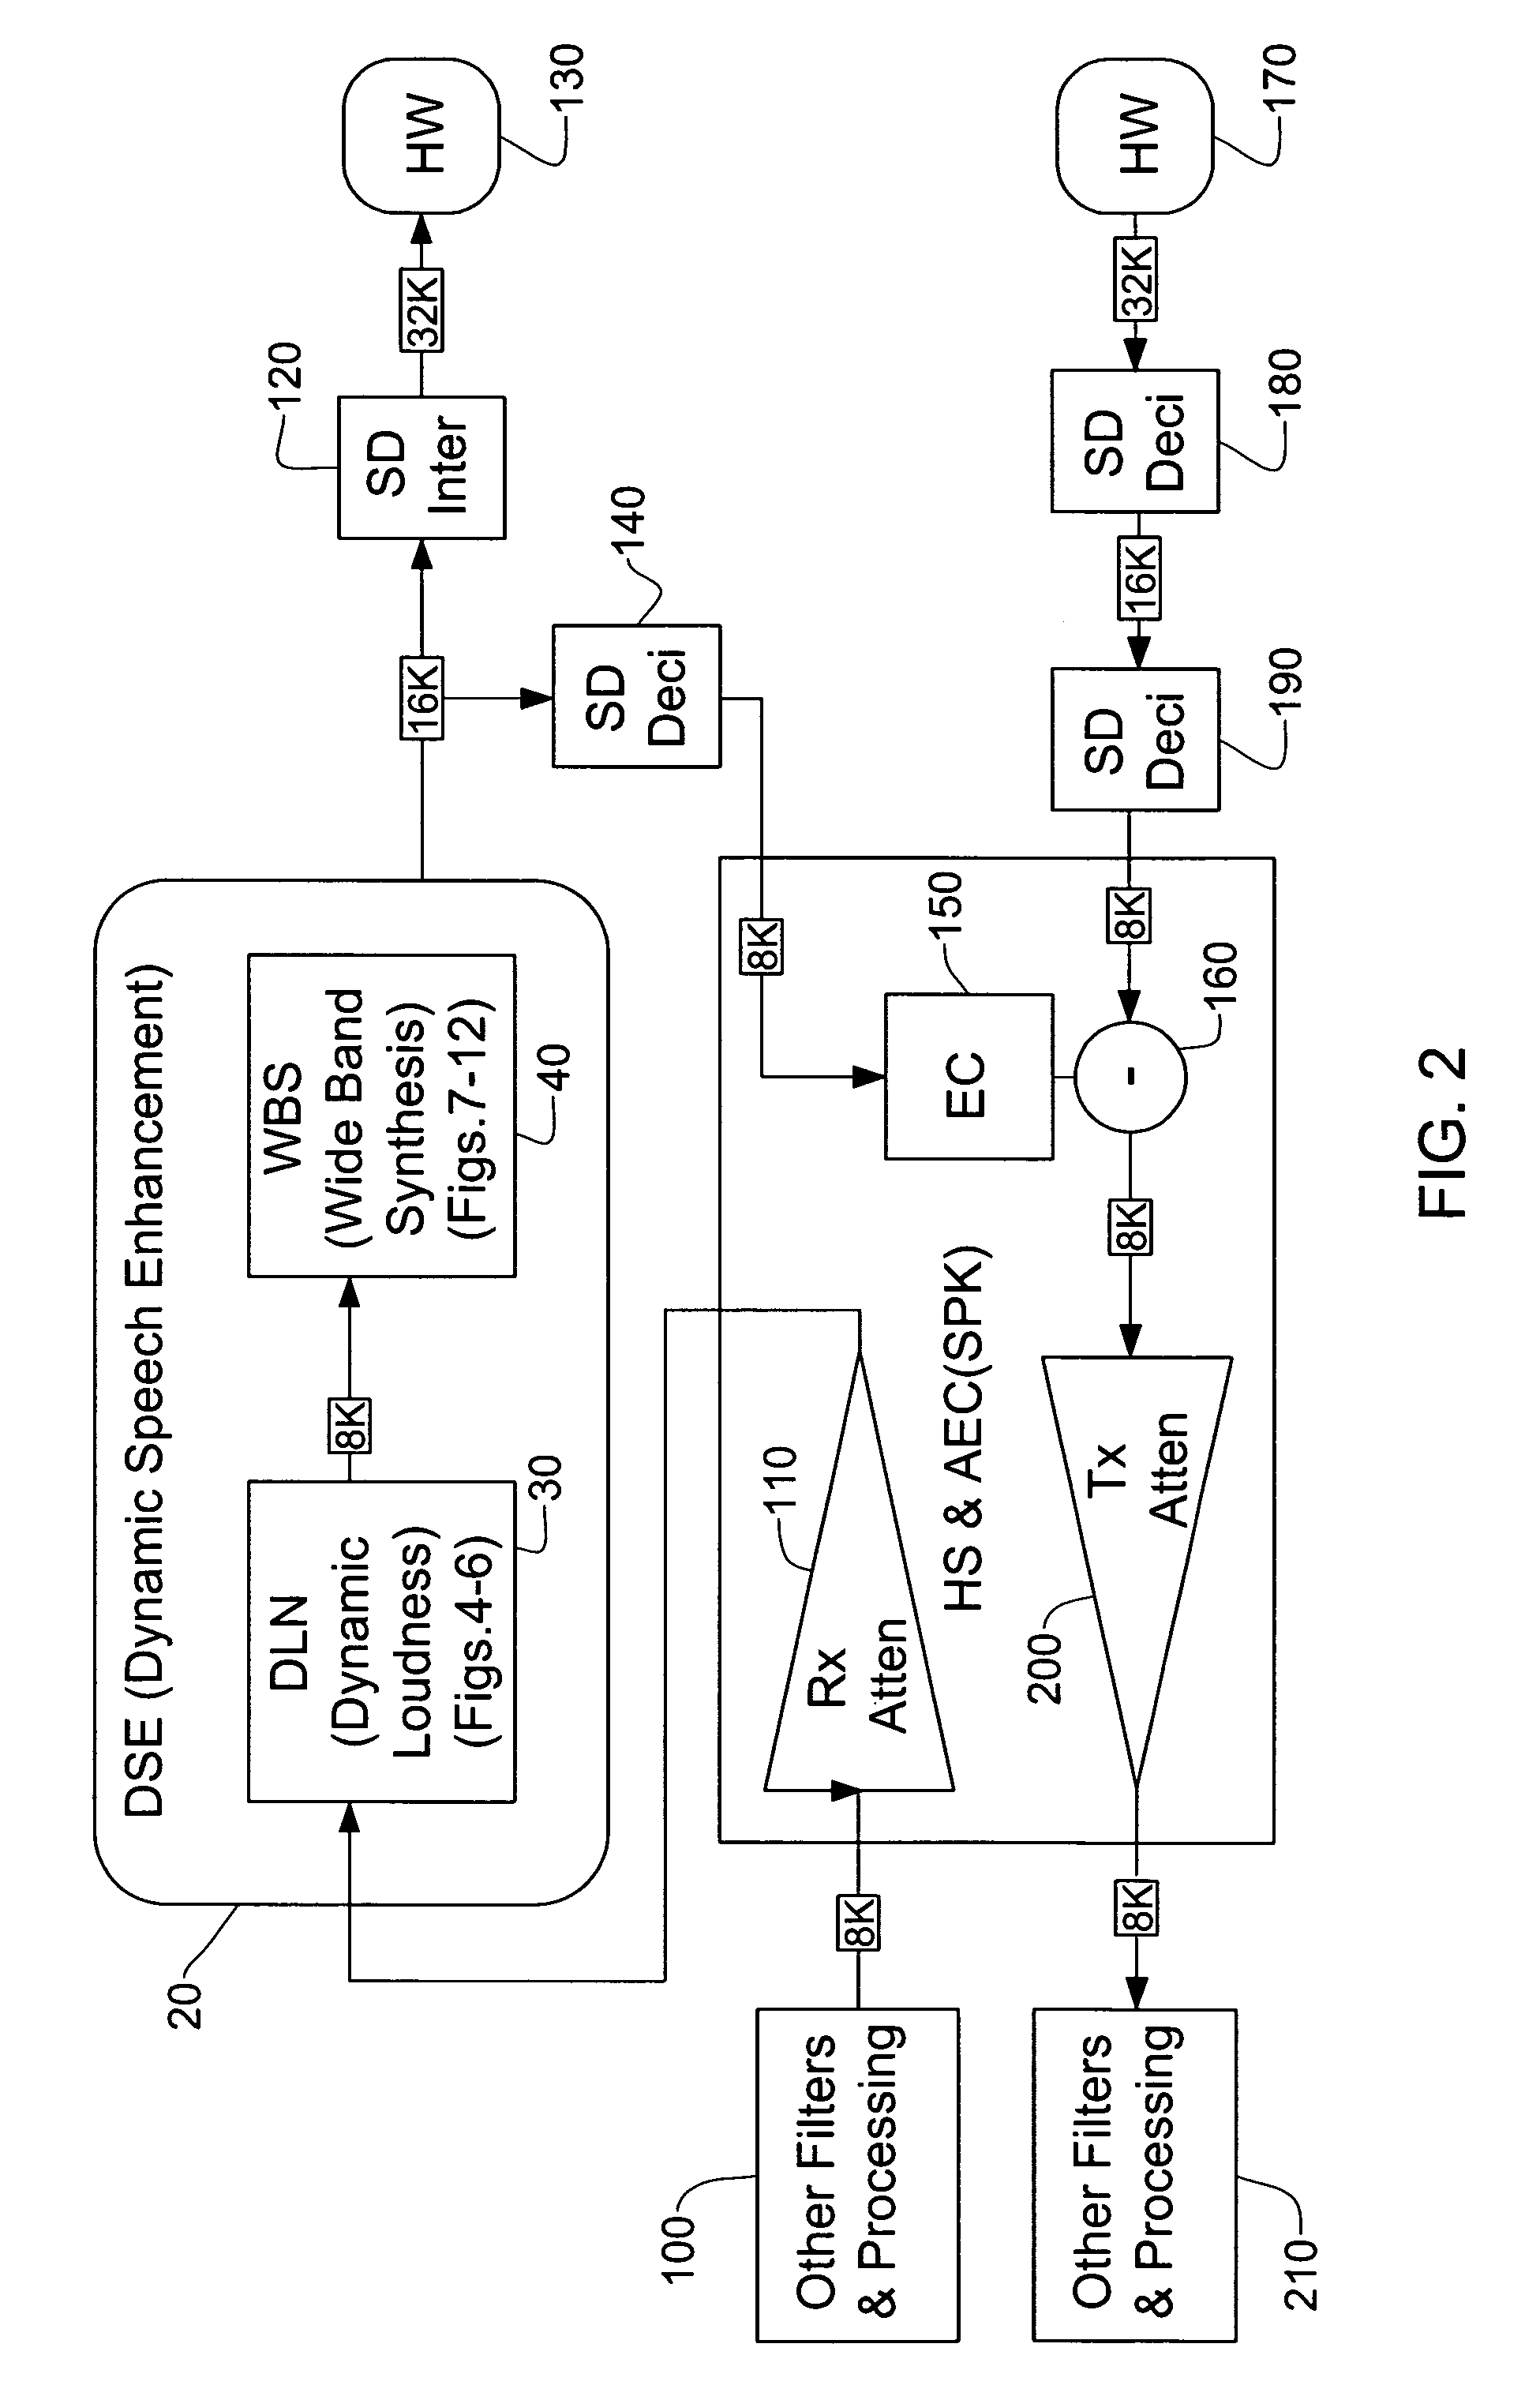 Apparatus and methods for enhancement of speech